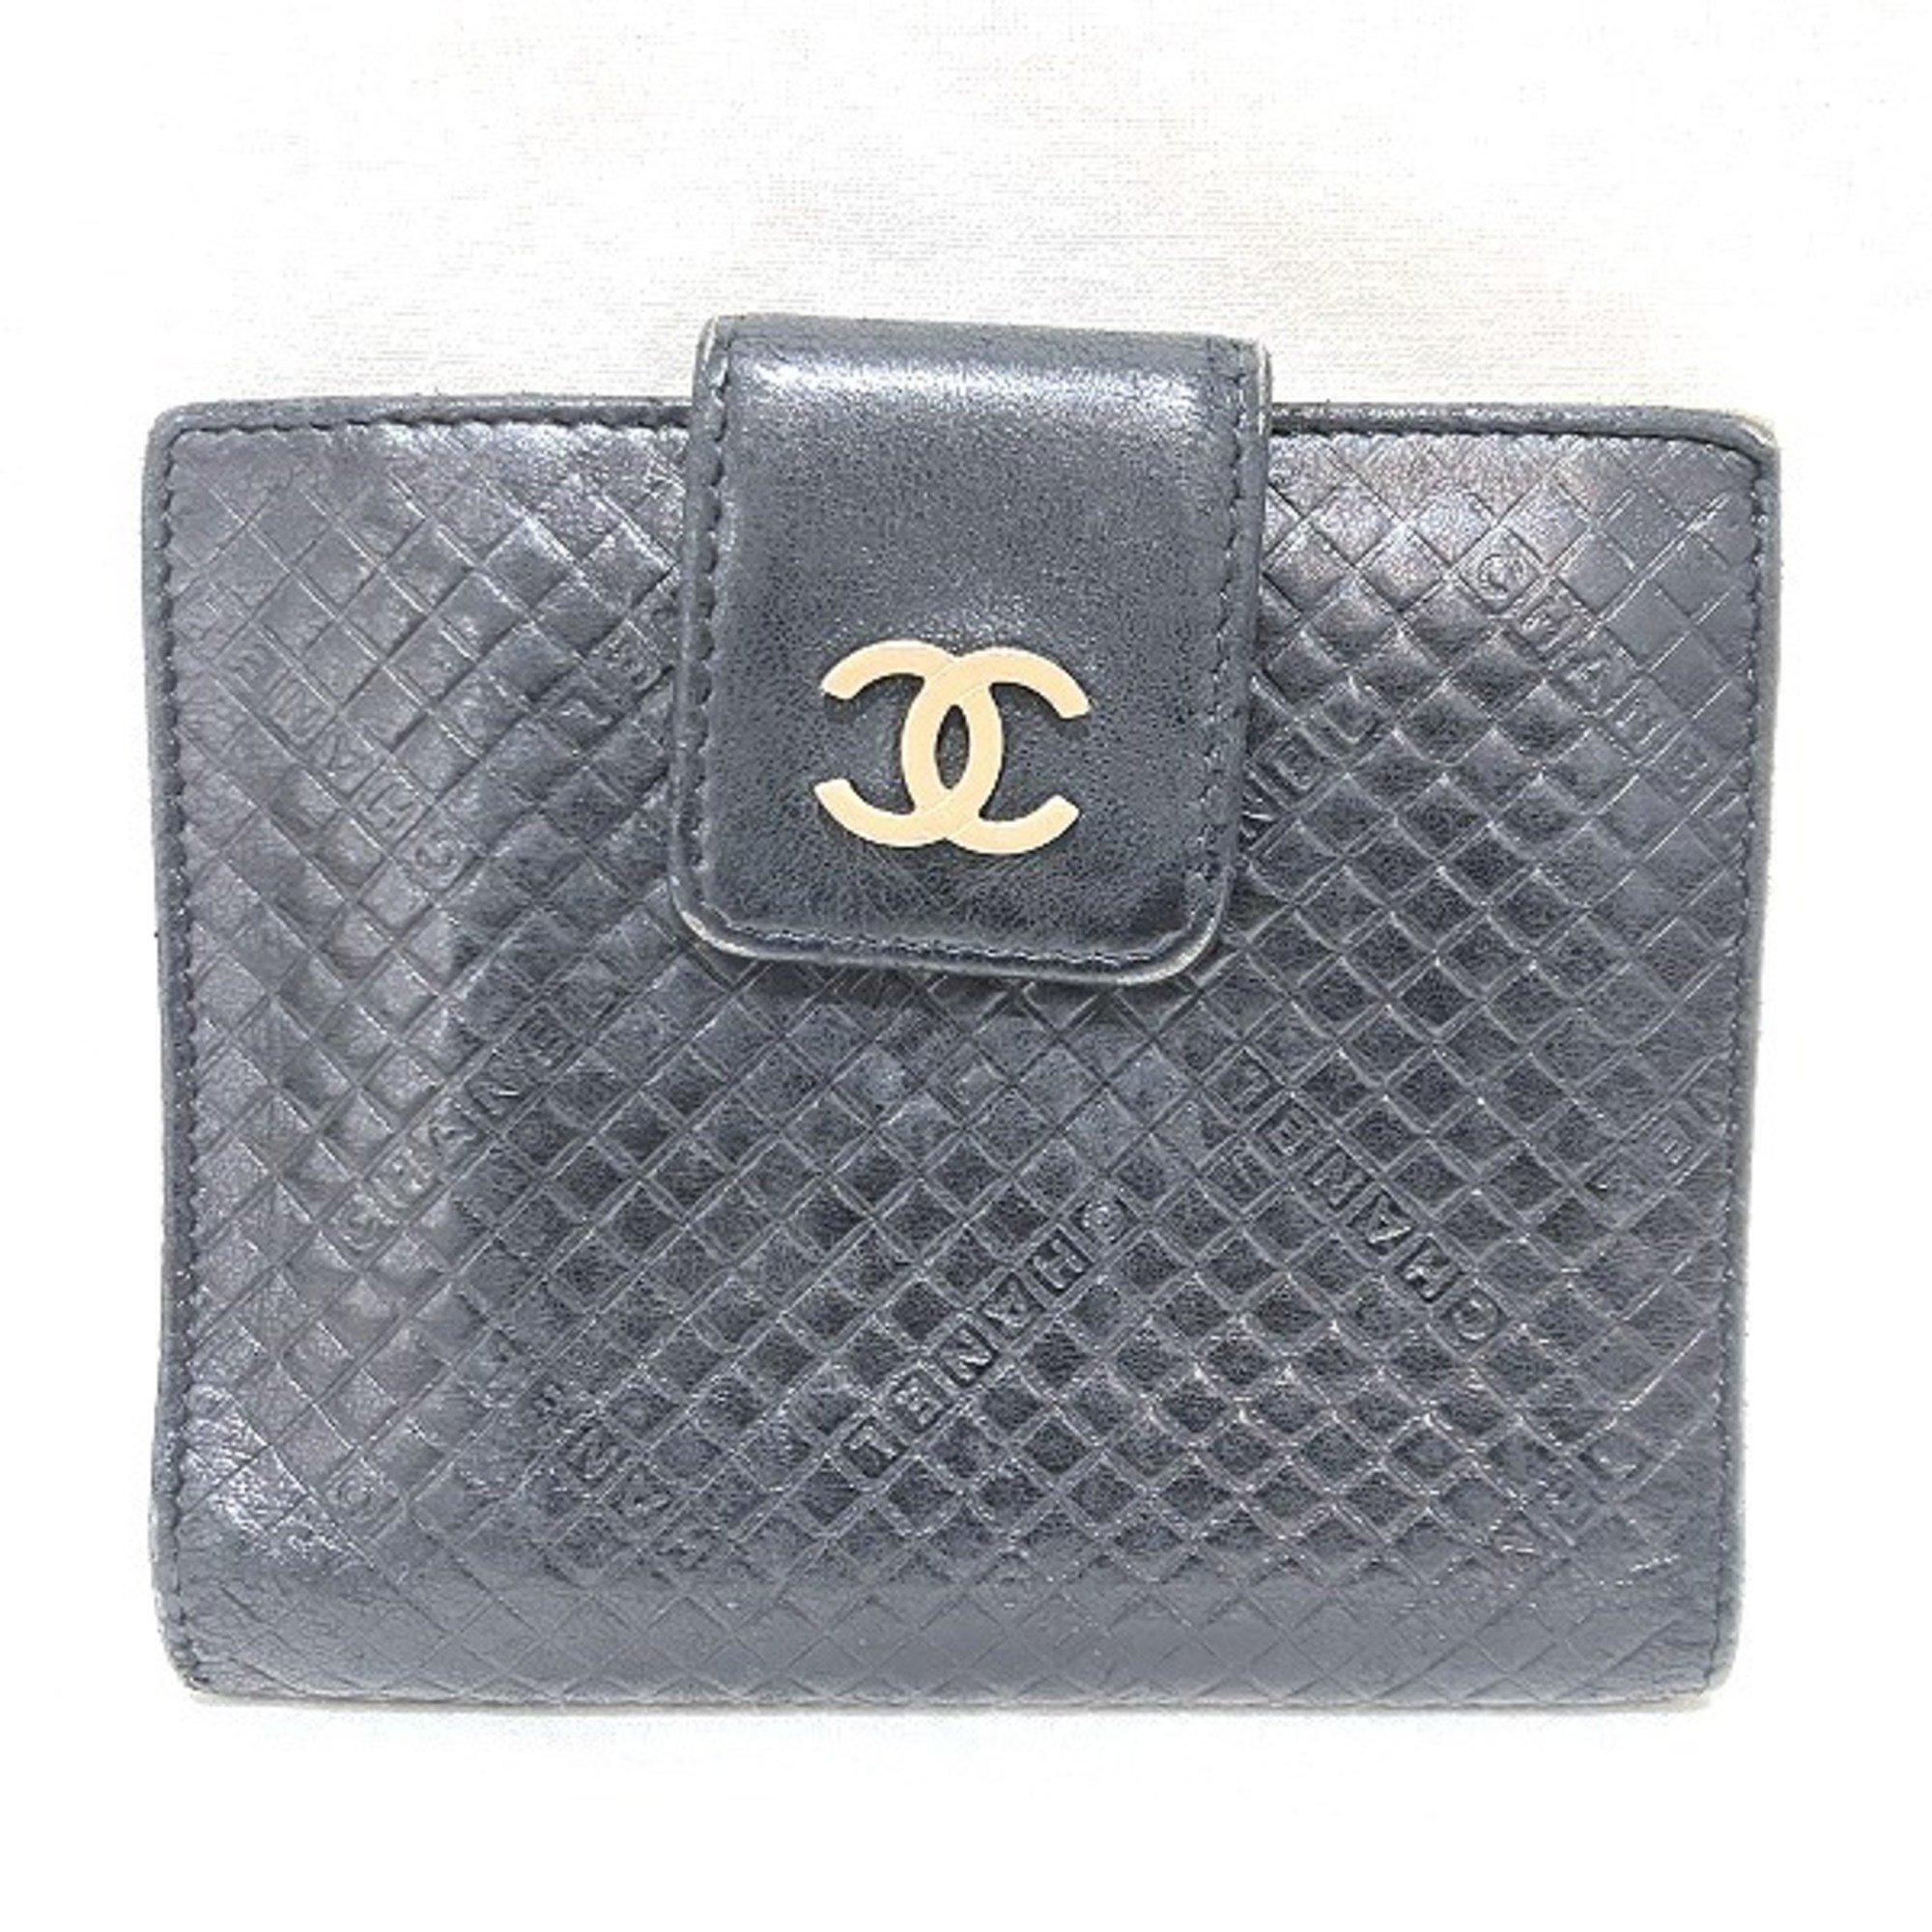 CHANEL Micro Chocolate Bar Black x Beige Leather Bi-fold Wallet for Men and Women